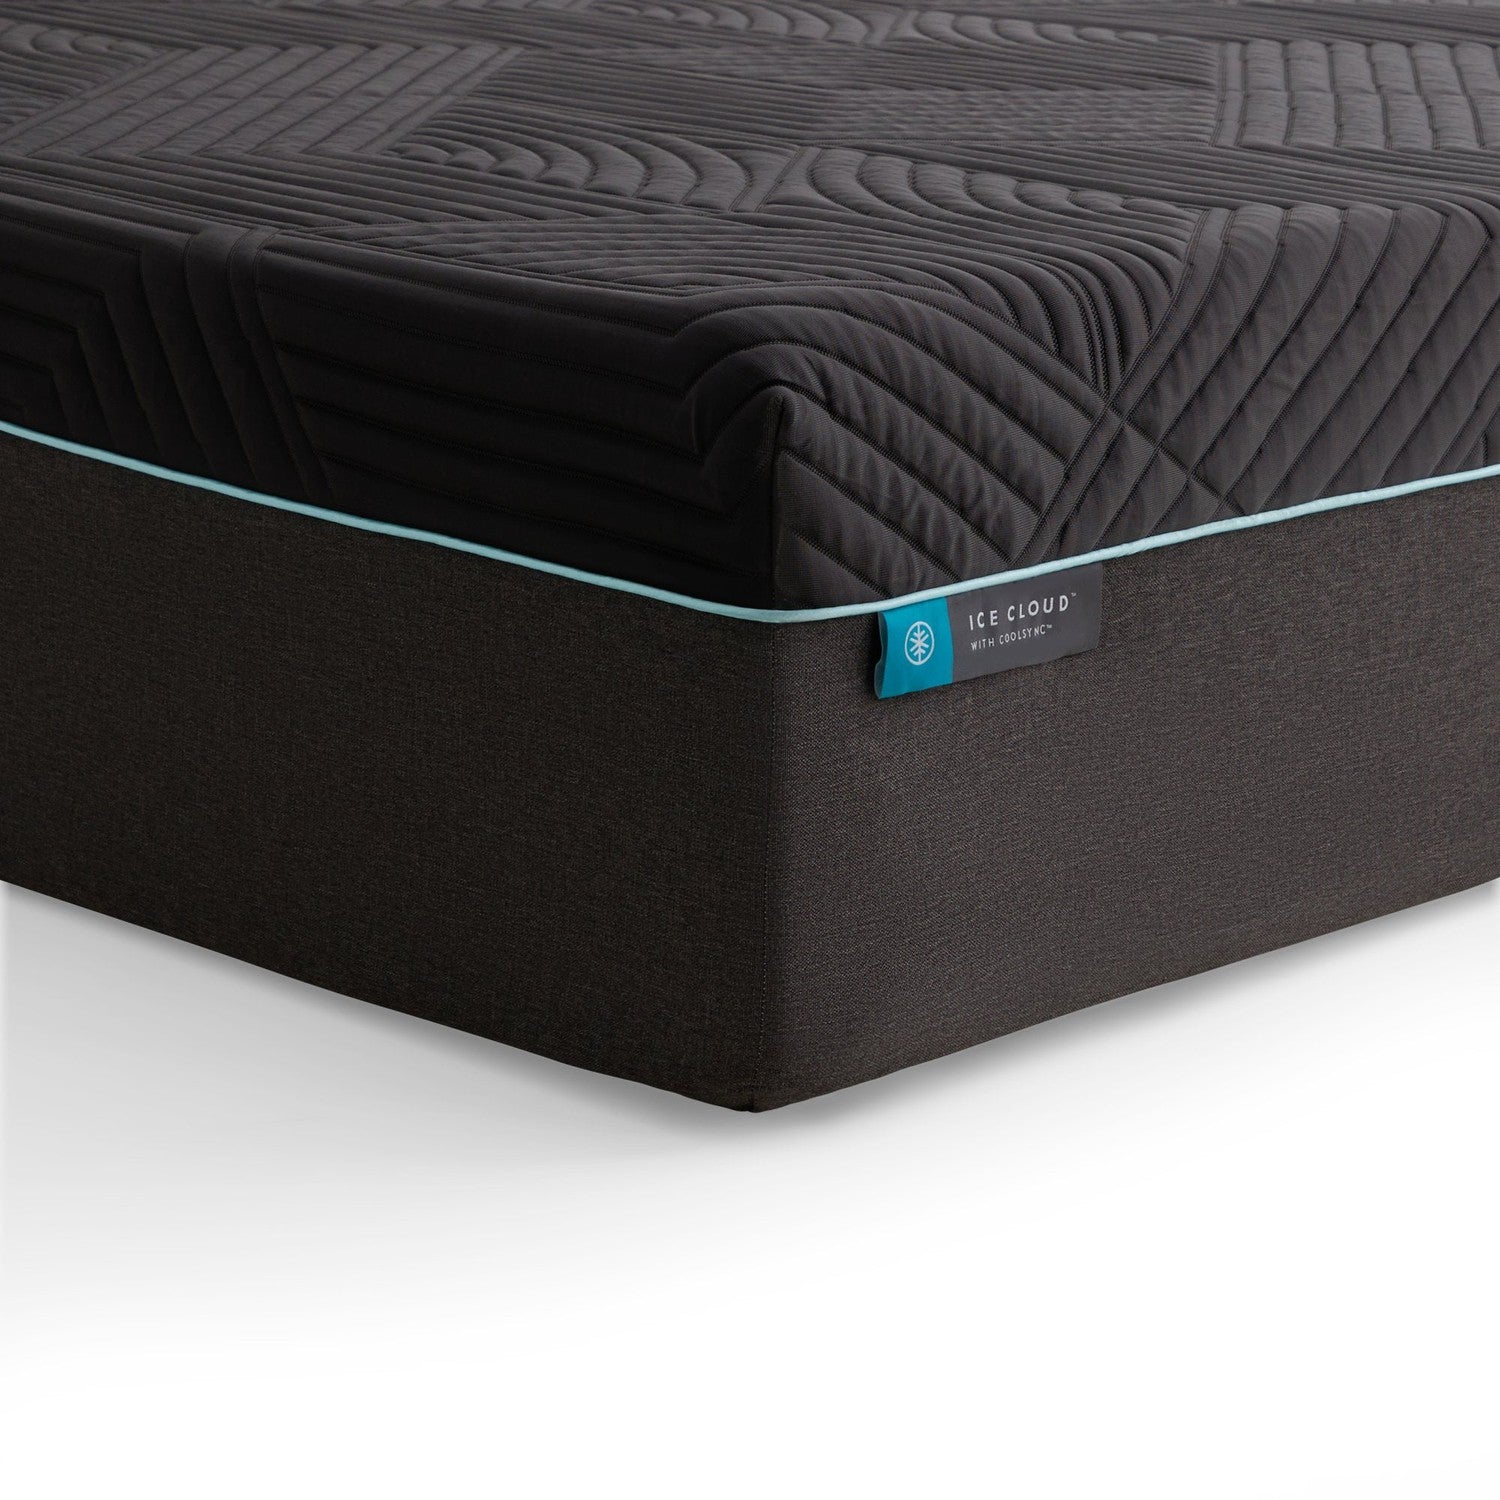 Malouf Ice Cloud CoolSync™ Mattress-Purely Relaxation